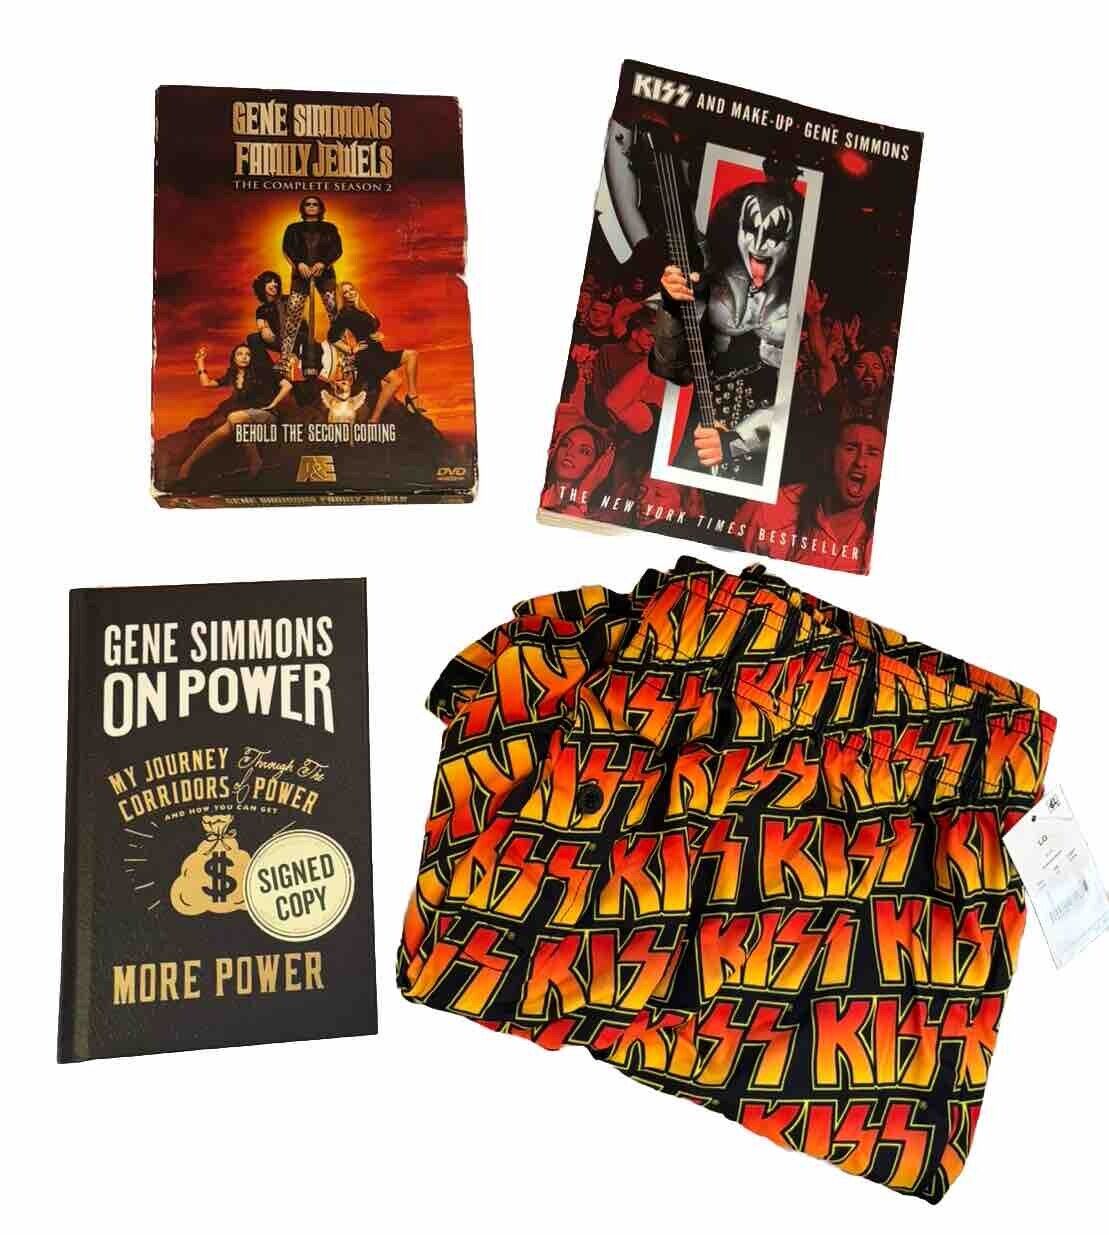 Gene Simmons Signed On Power Hardcover Book JSA, KISS and Make-Up, DVDs, Shorts